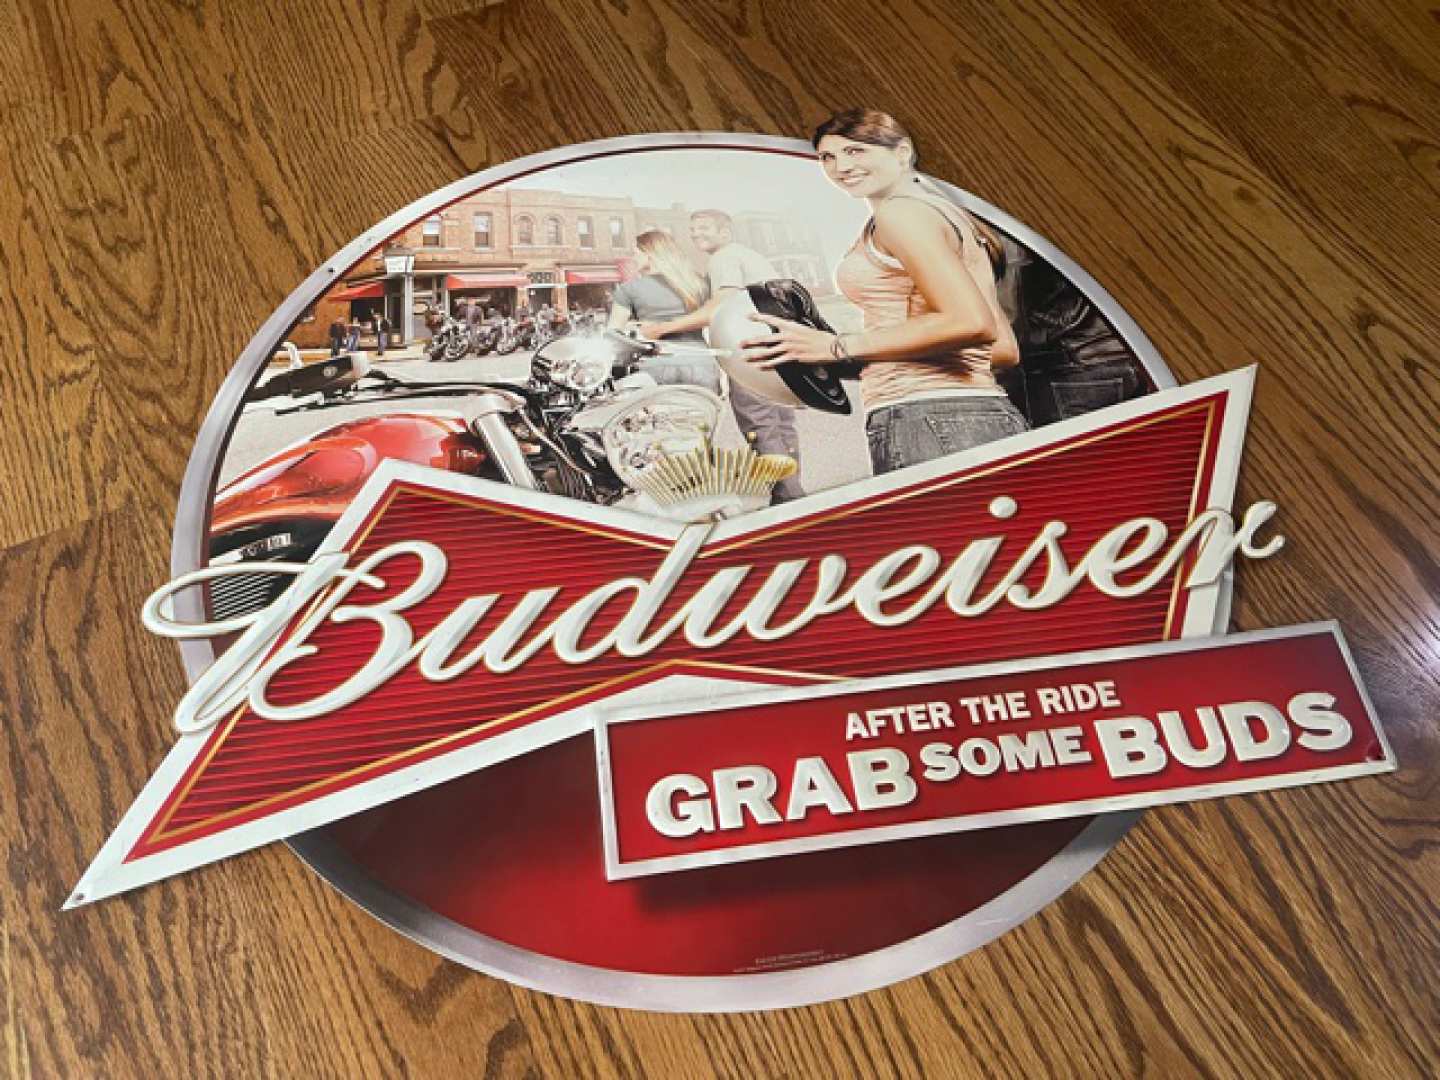 1st Image of a 2012 BUDWEISER SIGN GRAB SOME BUDS